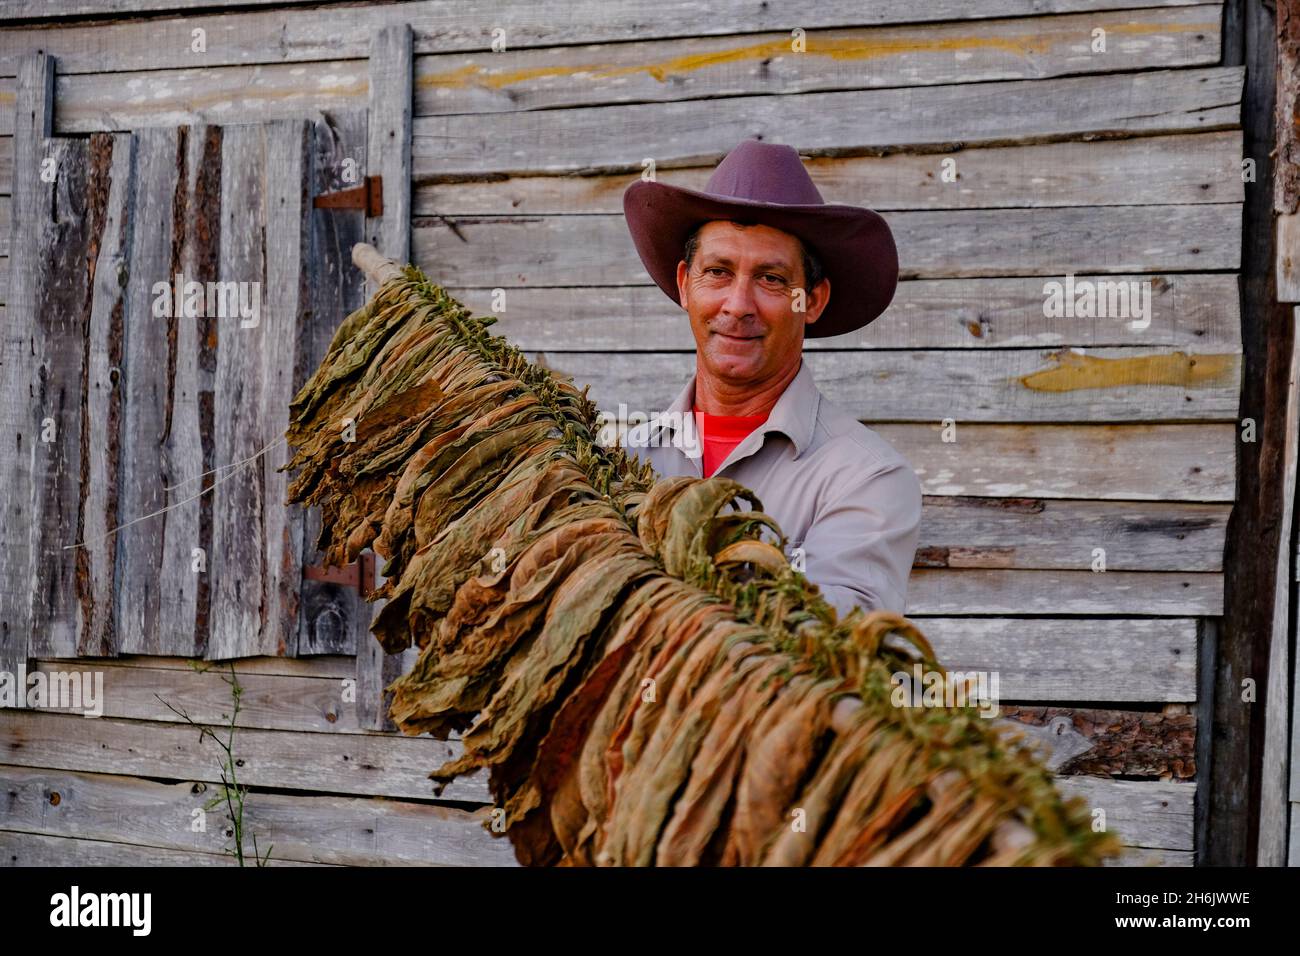 Tobacco farmer proudly displaying dried tobacco leaves, Pinar del Rio, Cuba, West Indies, Central America Stock Photo